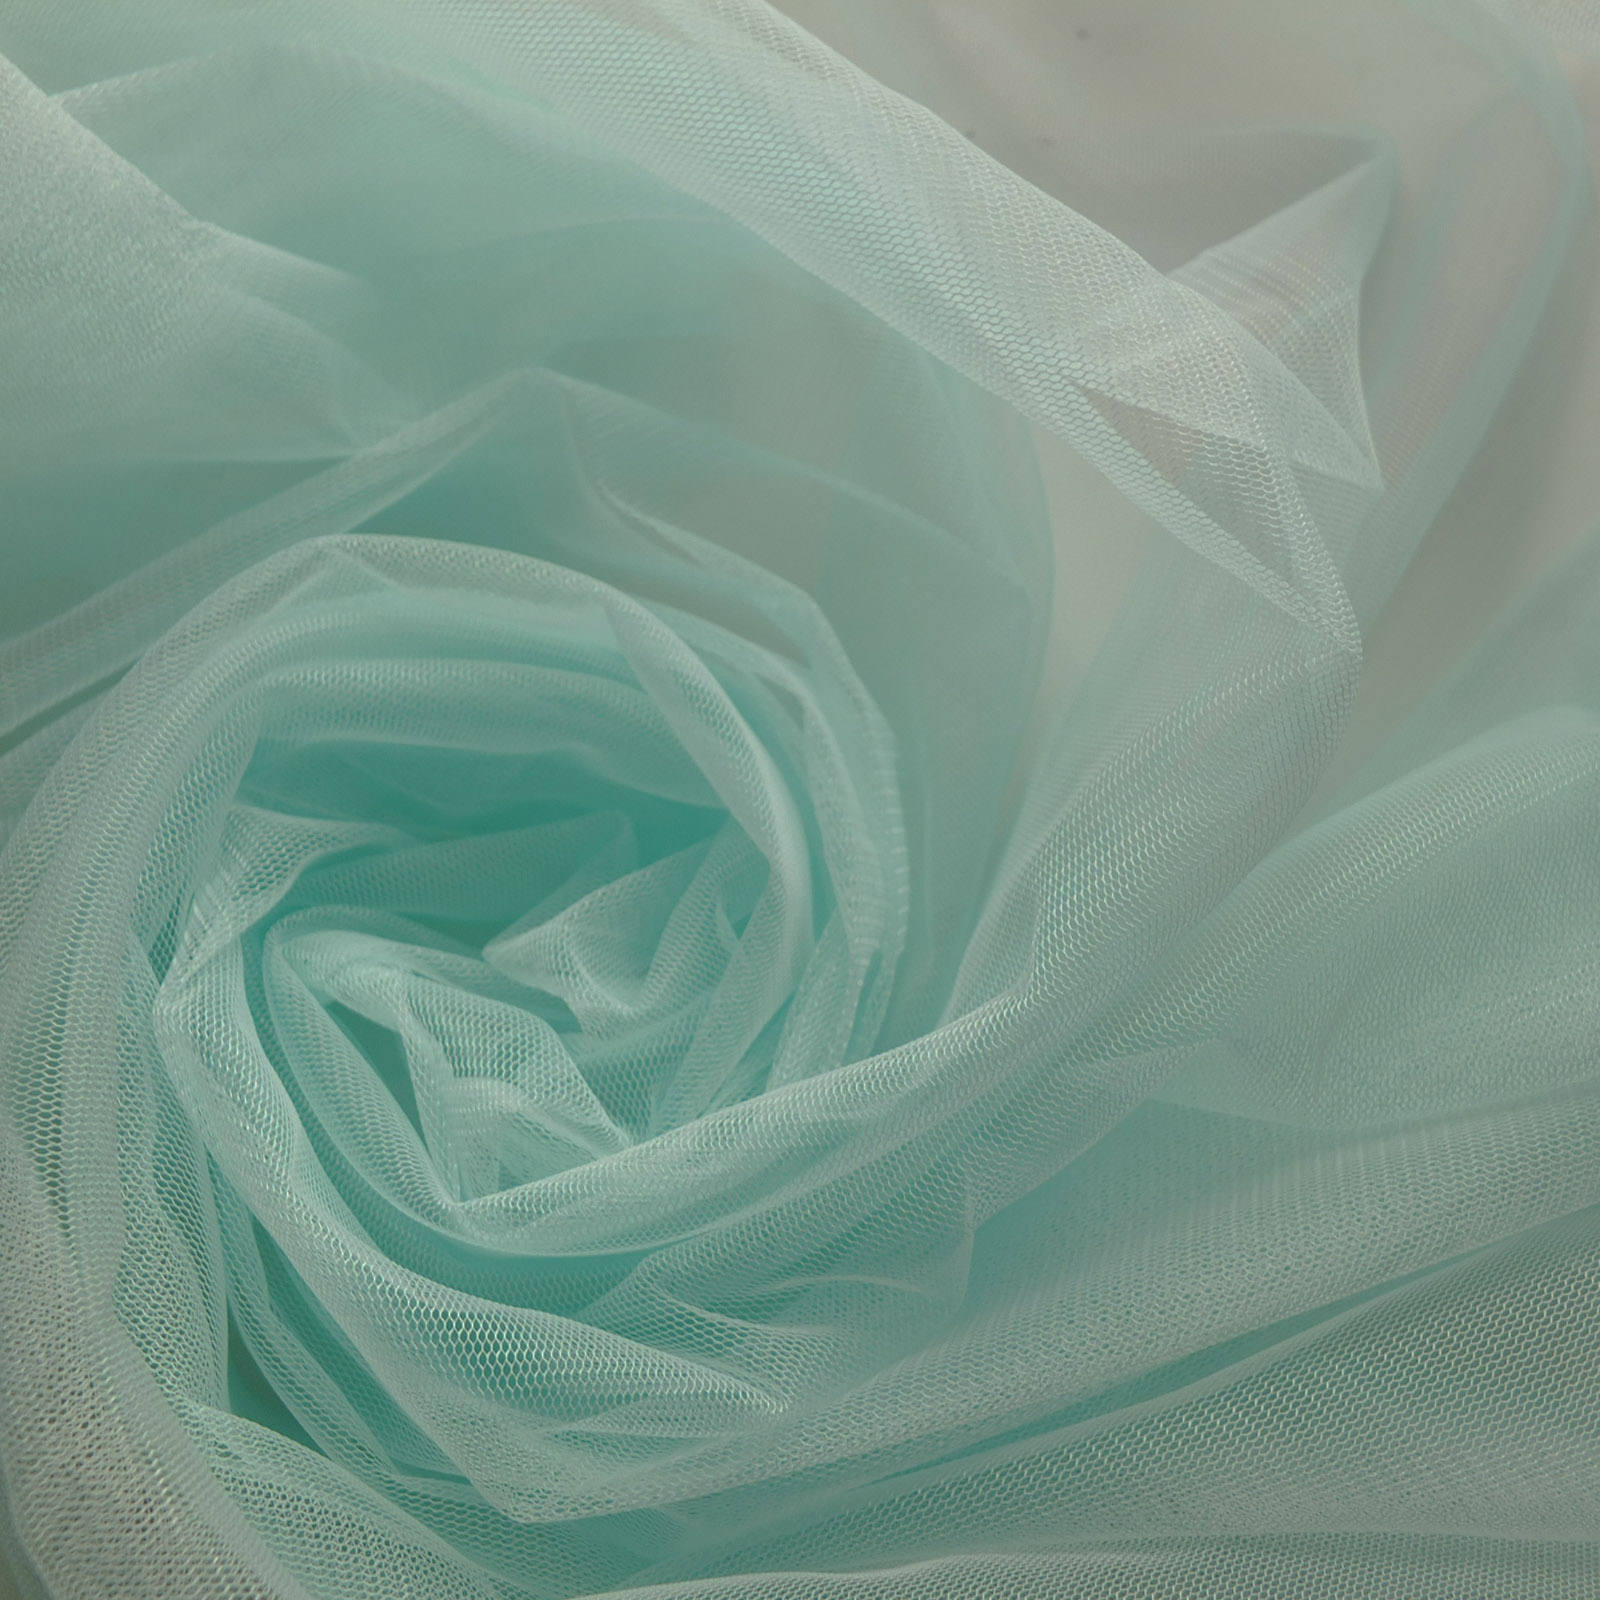 Pastel Mint Green Soft Tulle Fabric 150cm Wide Evening / | Etsy